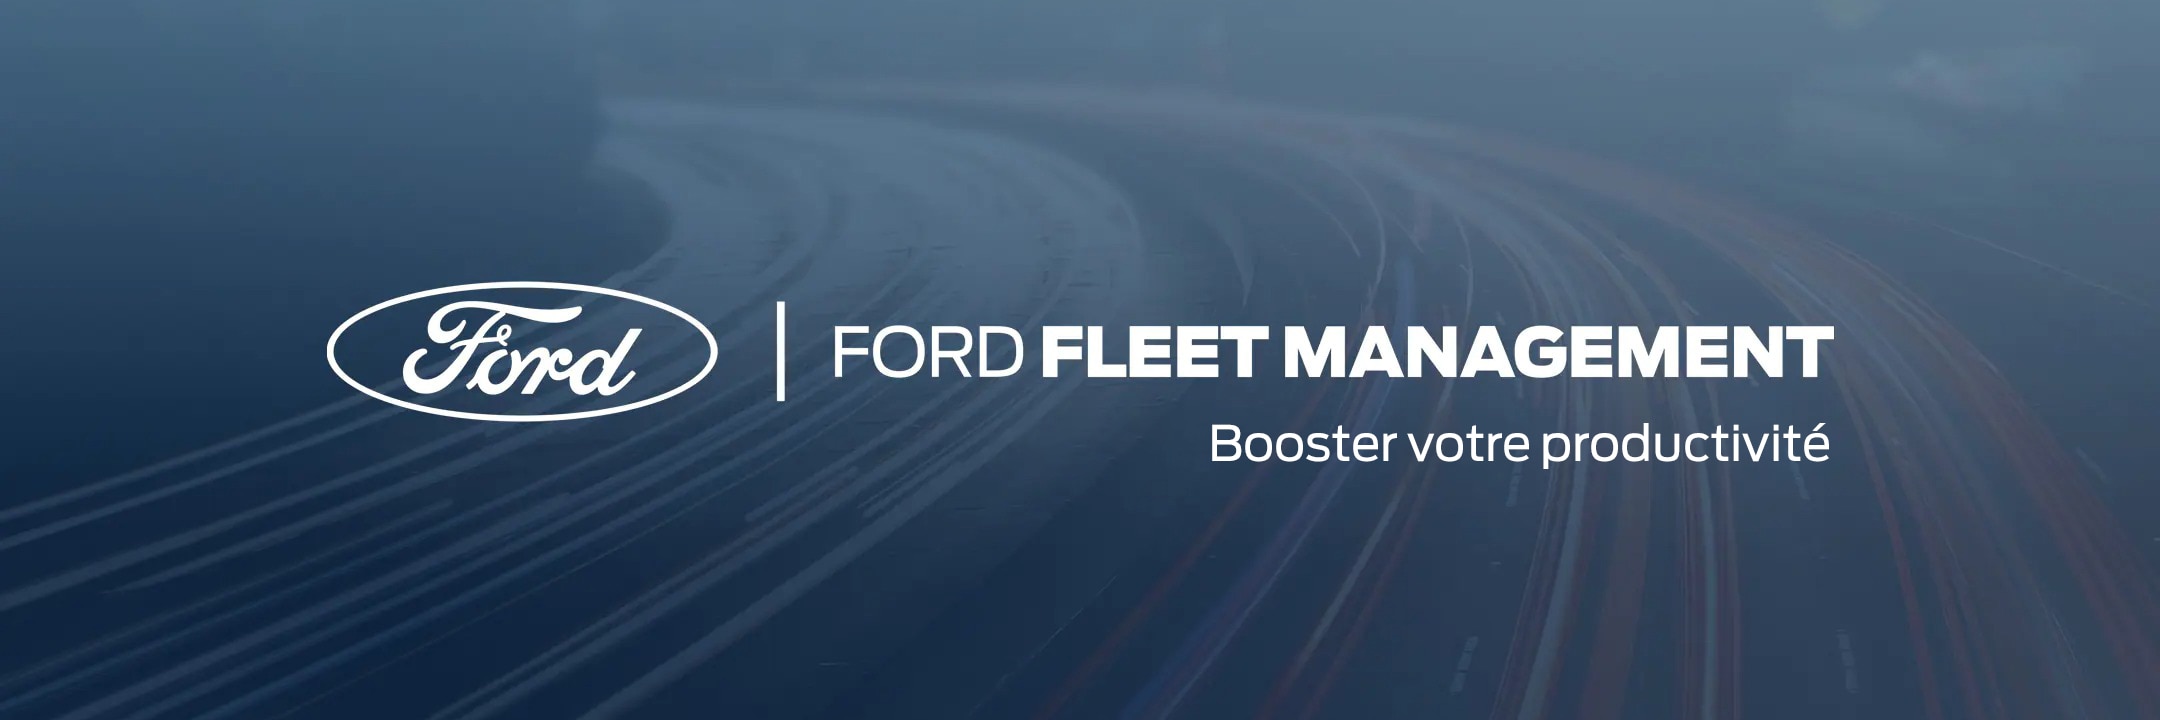 Ford Fleet Management with Ford logo